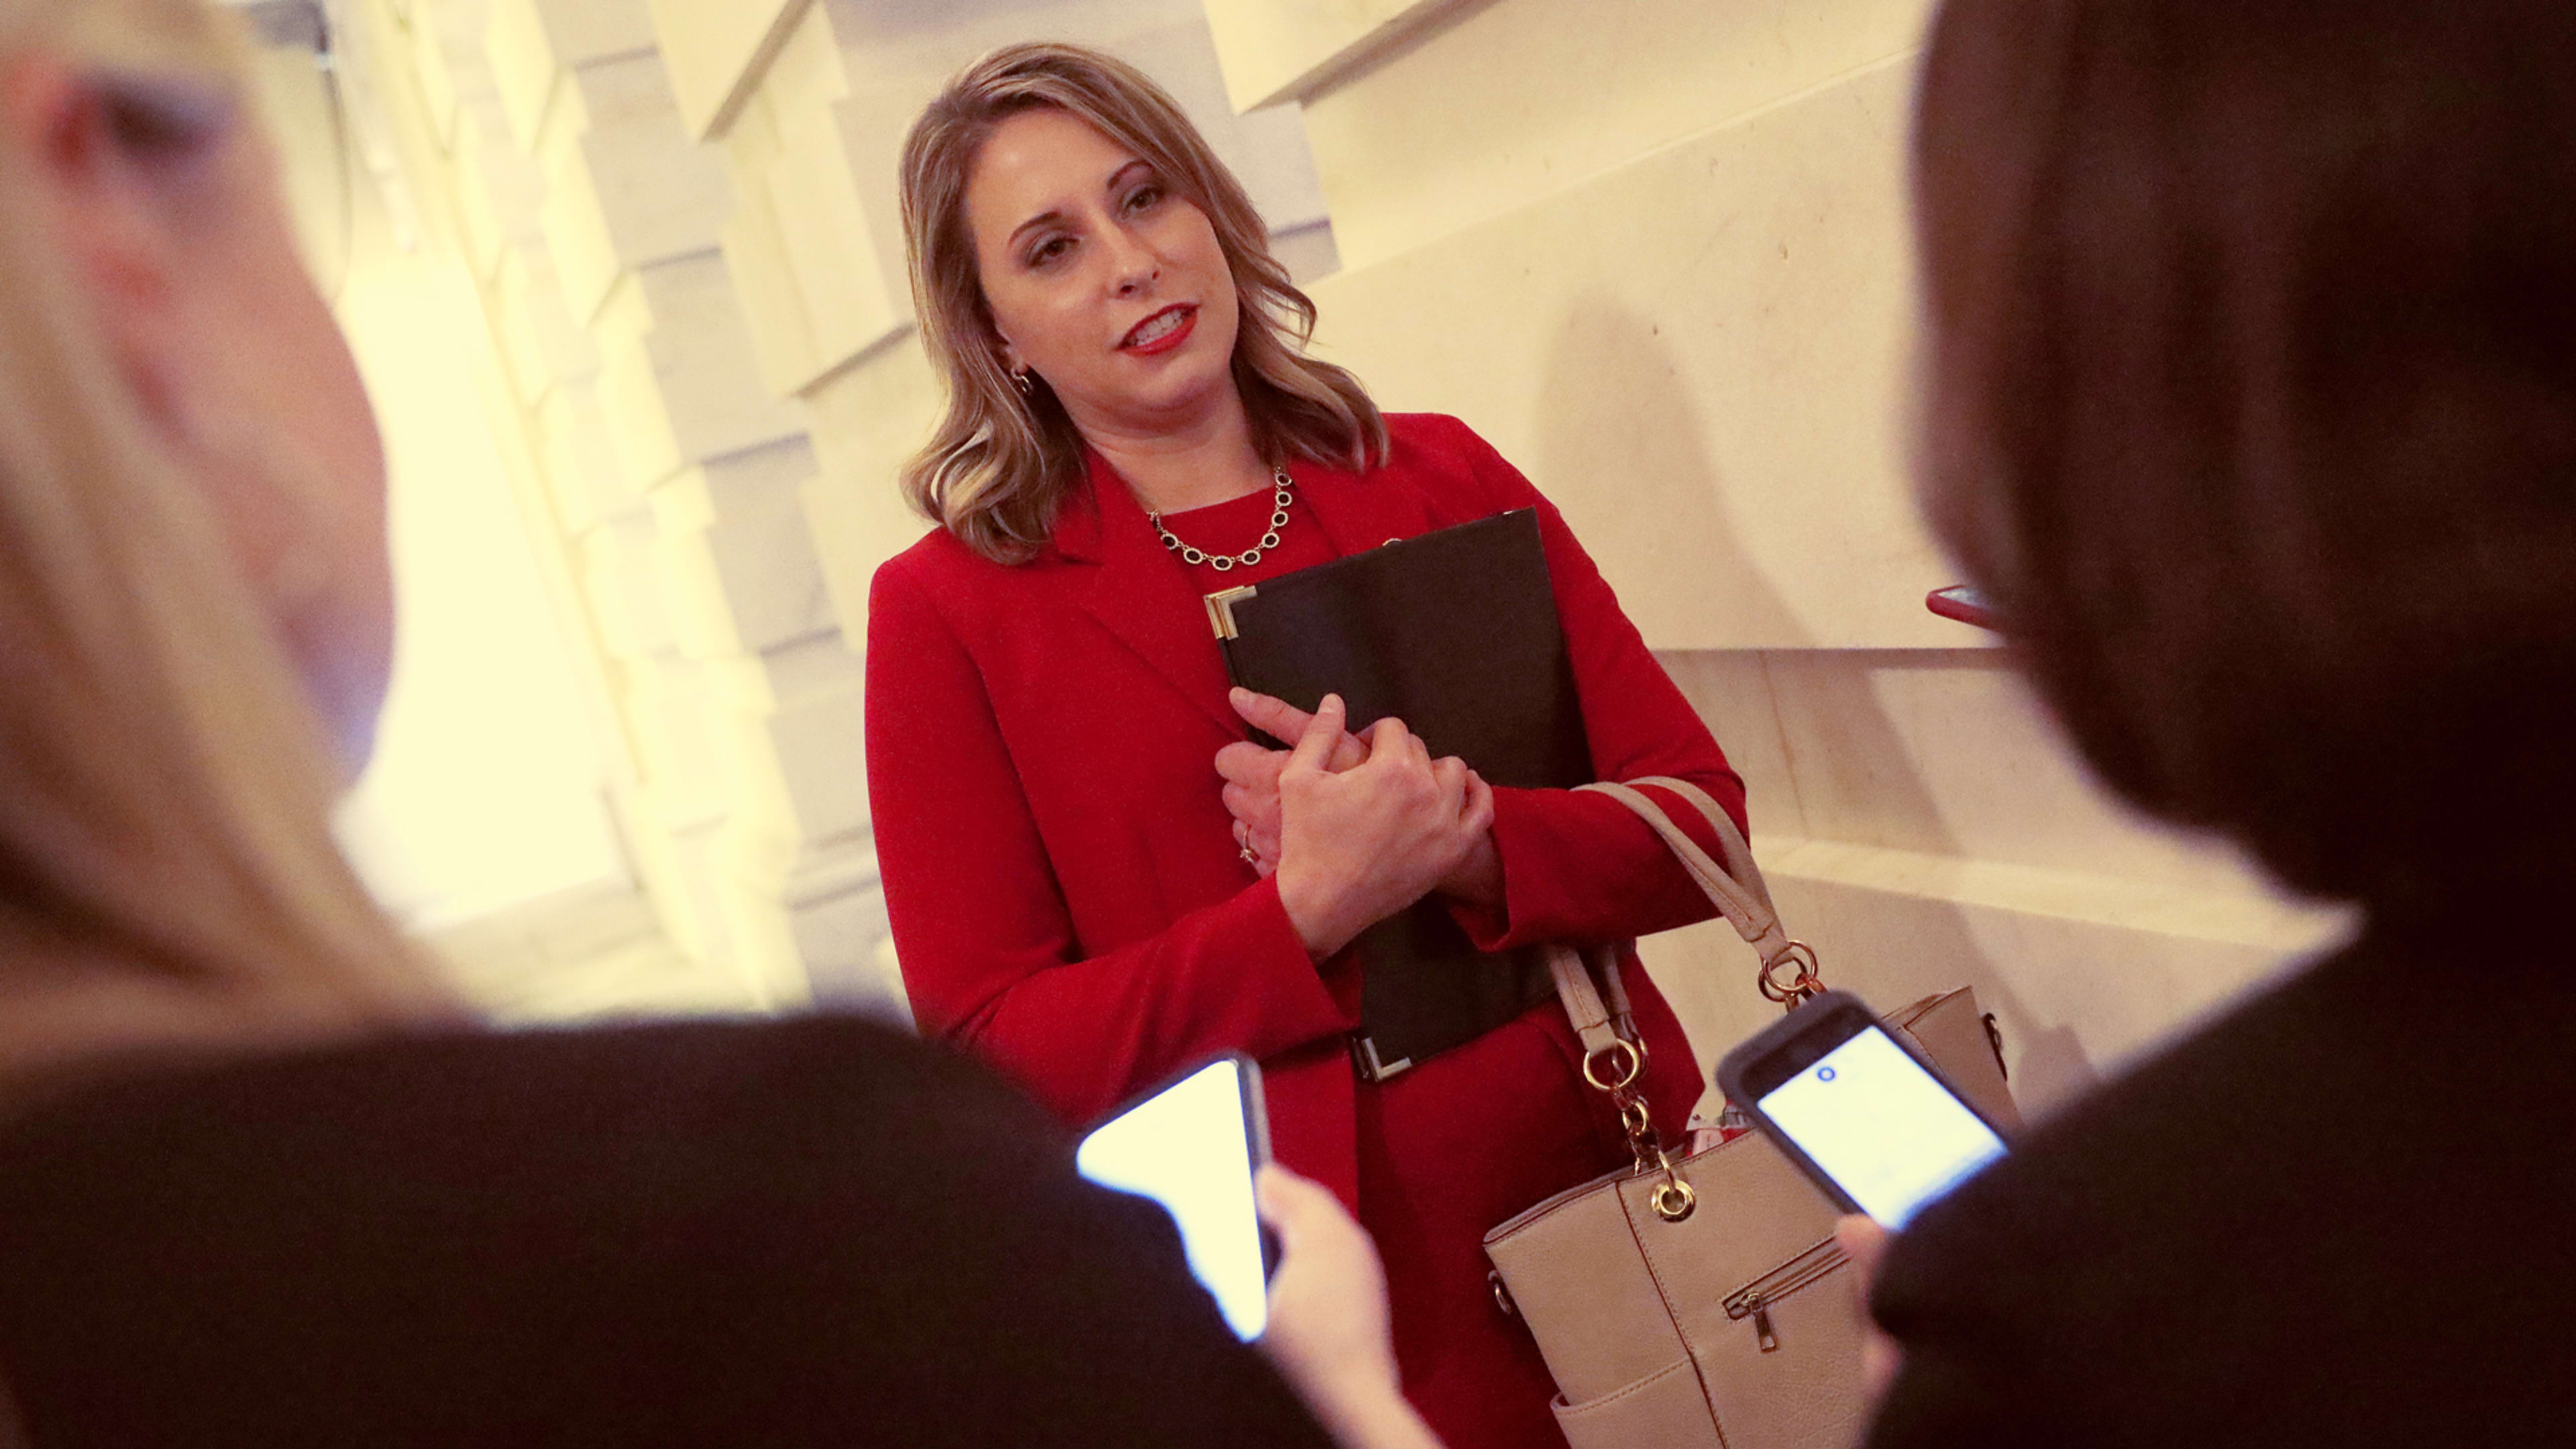 ‘I’m leaving because of a misogynistic culture’: Watch Katie Hill’s goodbye speech to Congress